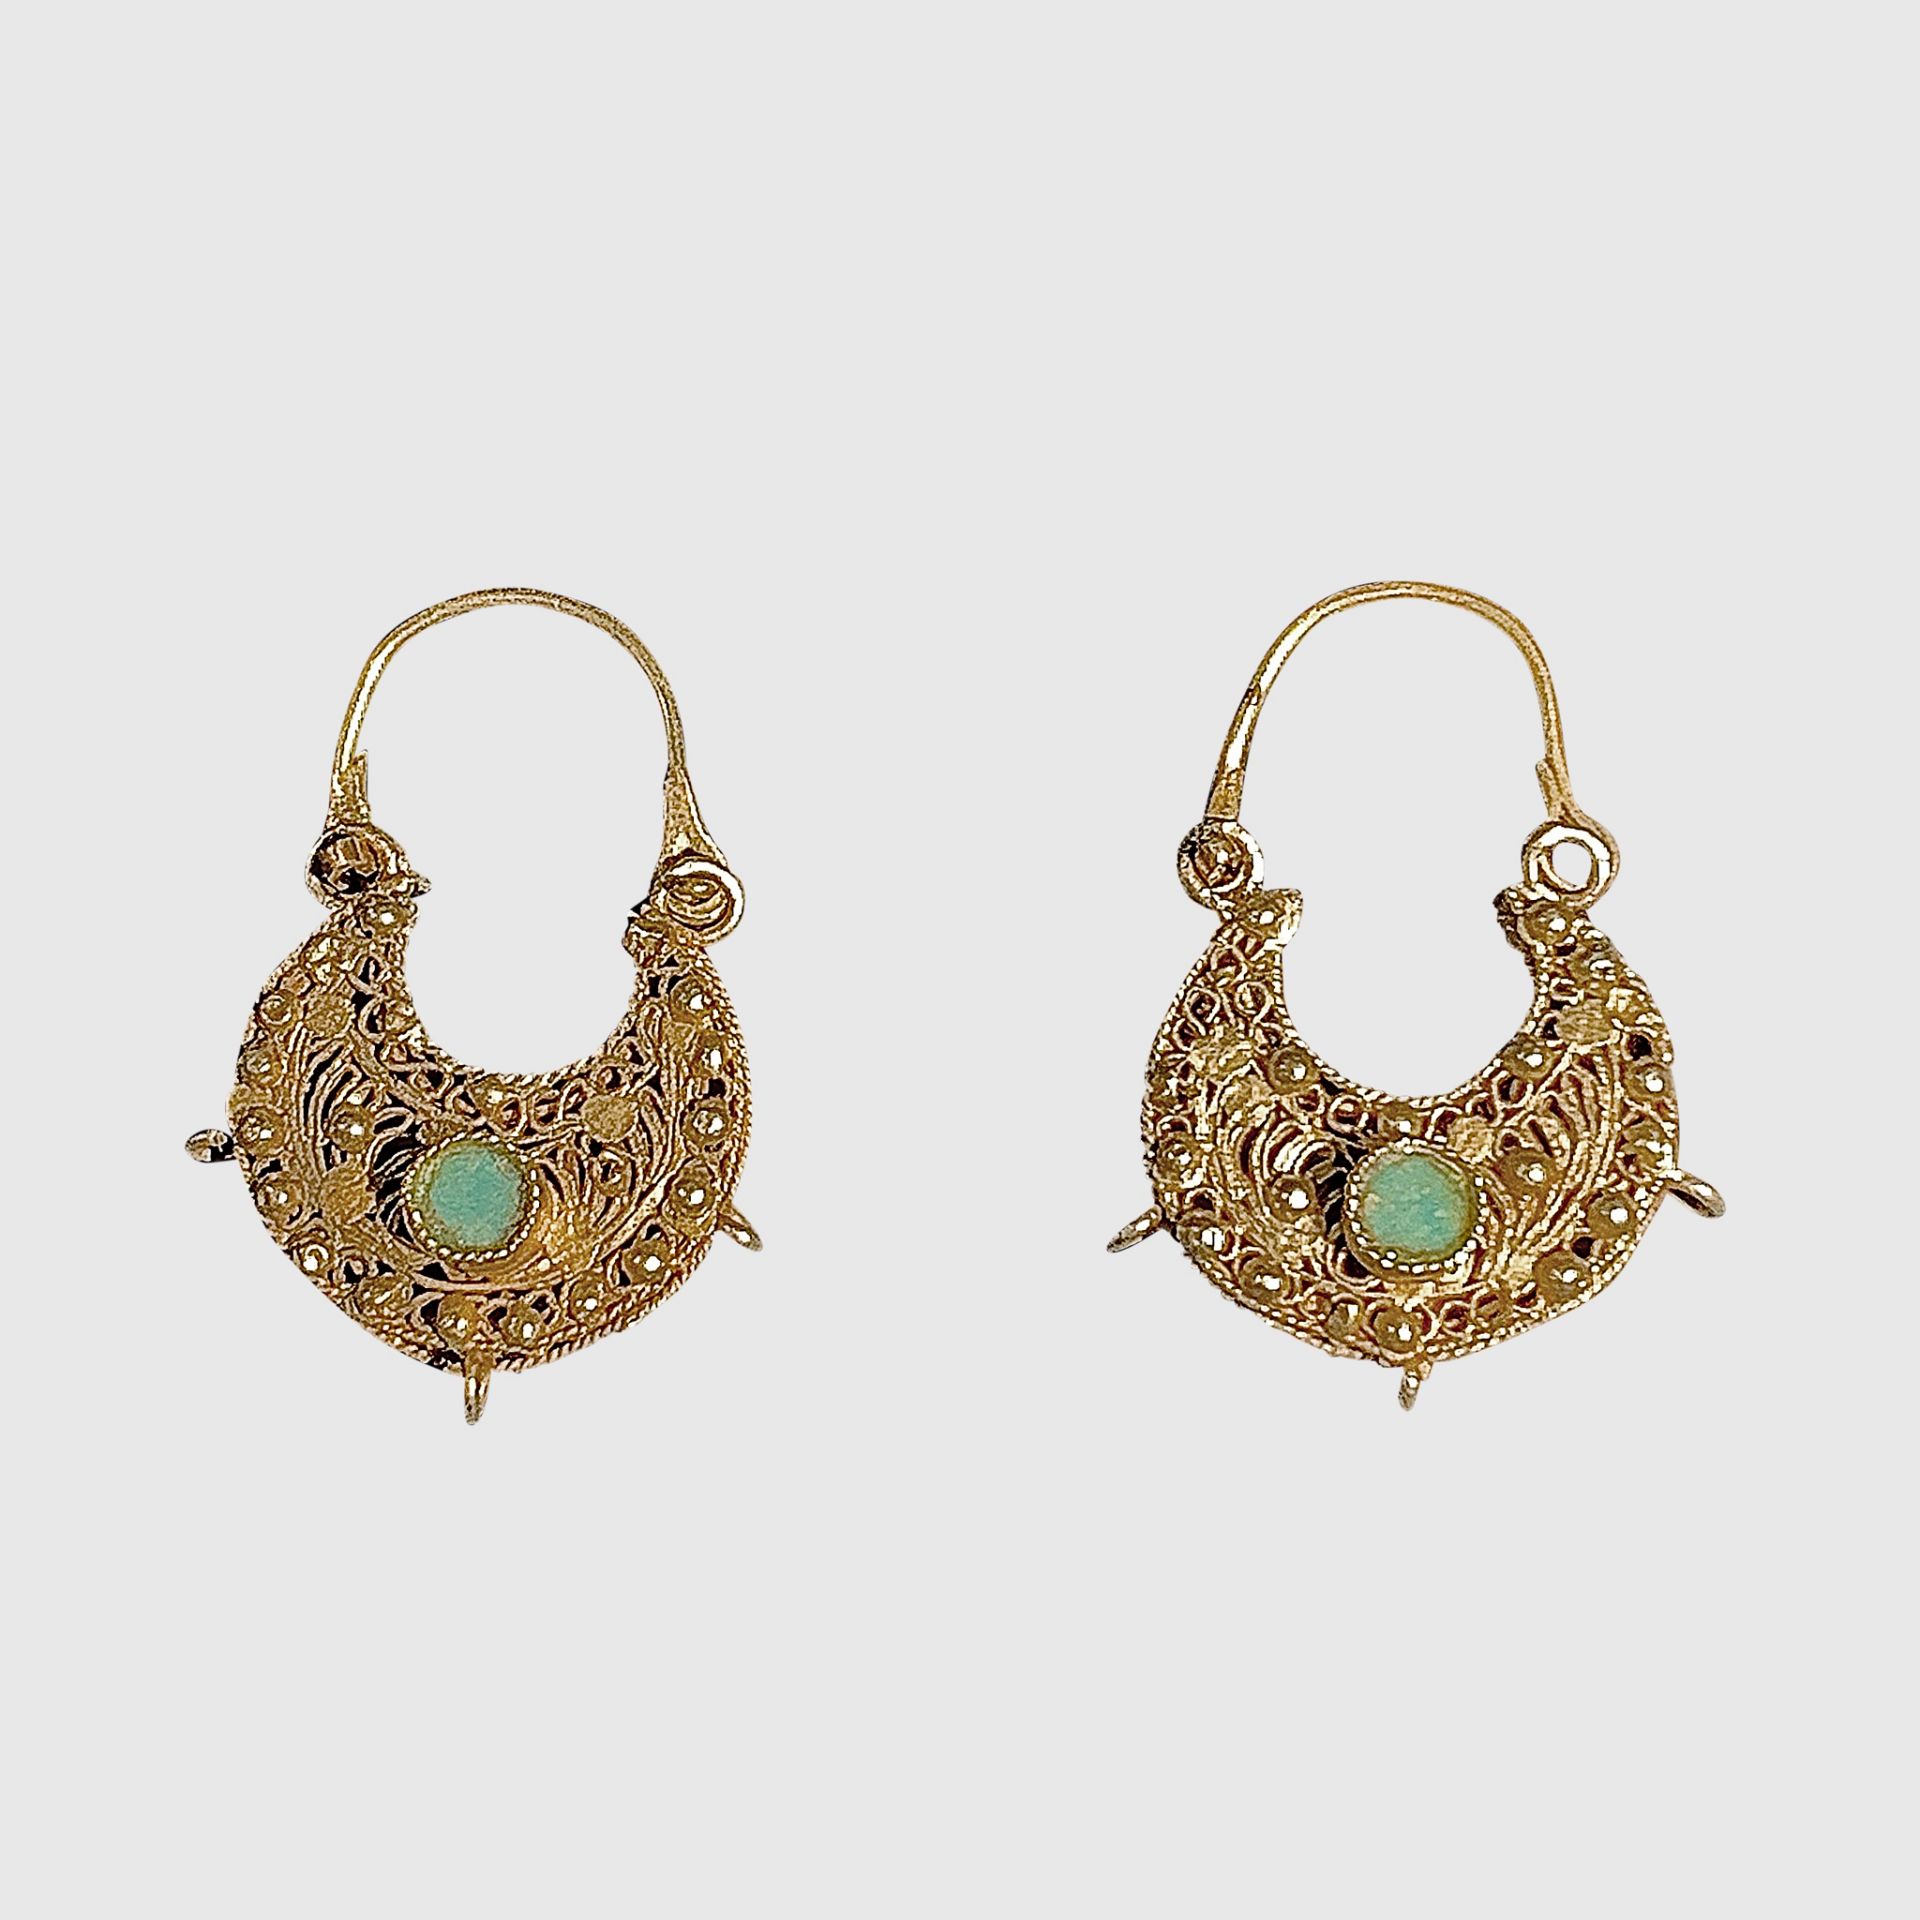 PAIR OF FATIMID FILIGREE EARRINGS EGYPT OR GREATER SYRIA, 11TH CENTURY